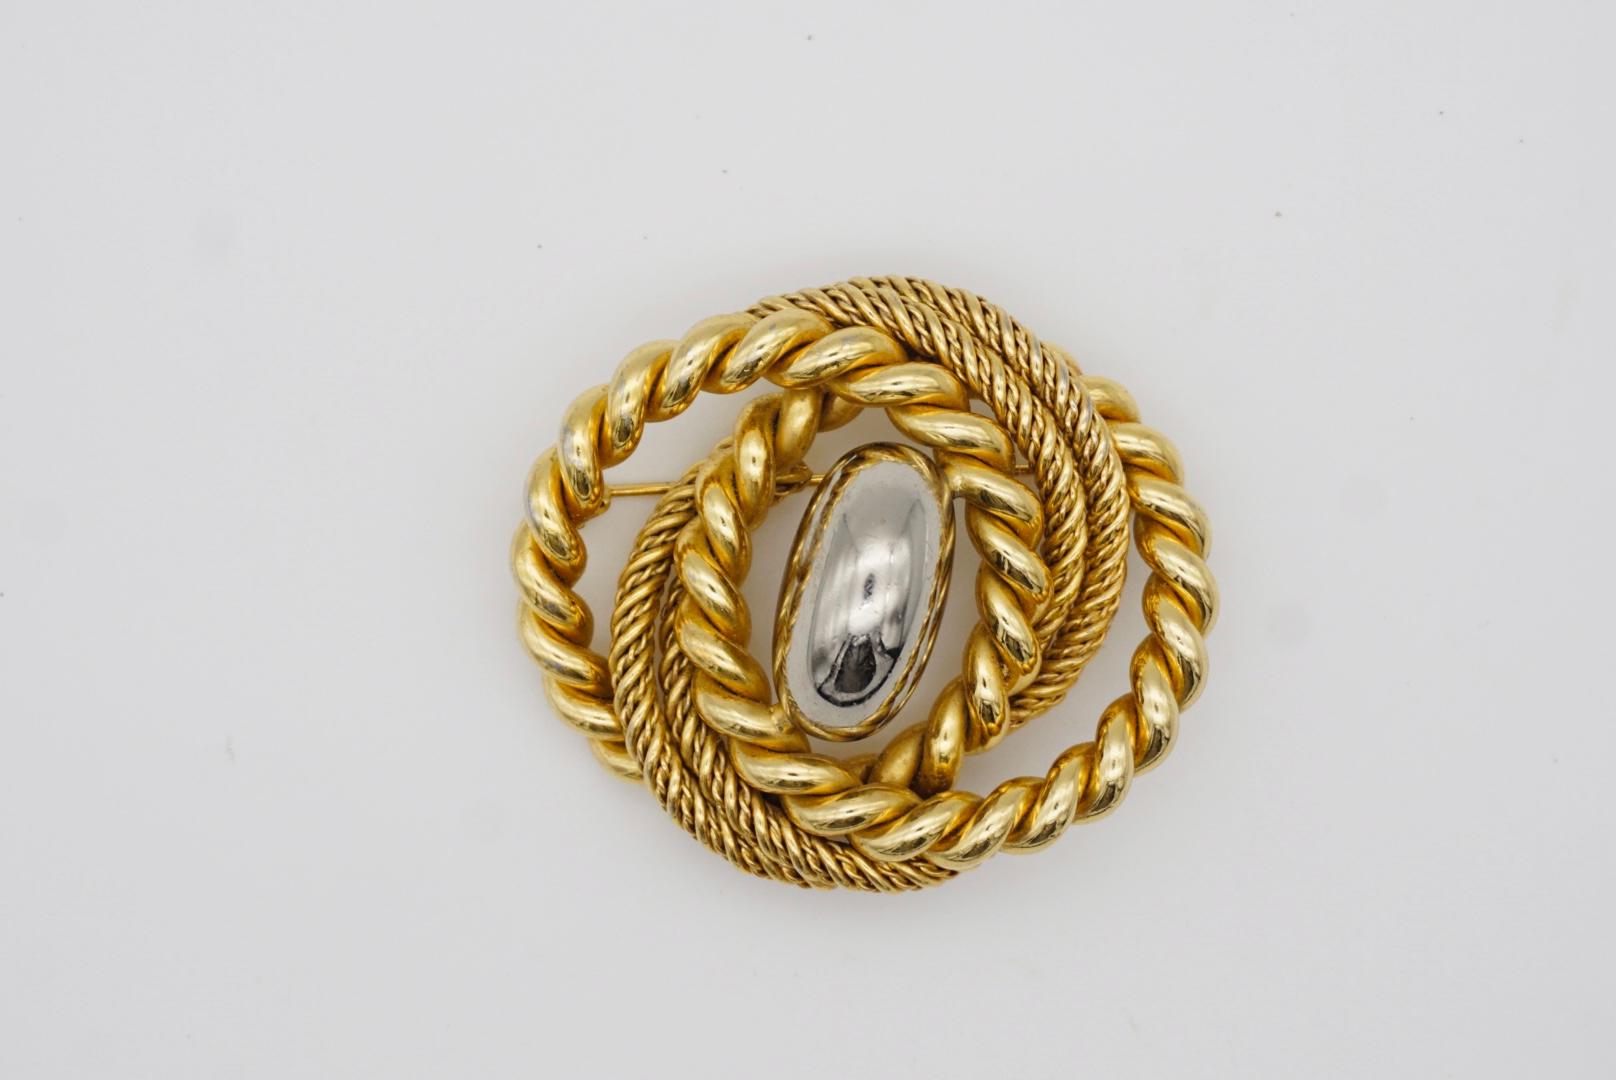 Christian Dior GROSSE 1969 Vintage Large Chunky Swirl Twist Gold Silver Brooch For Sale 1